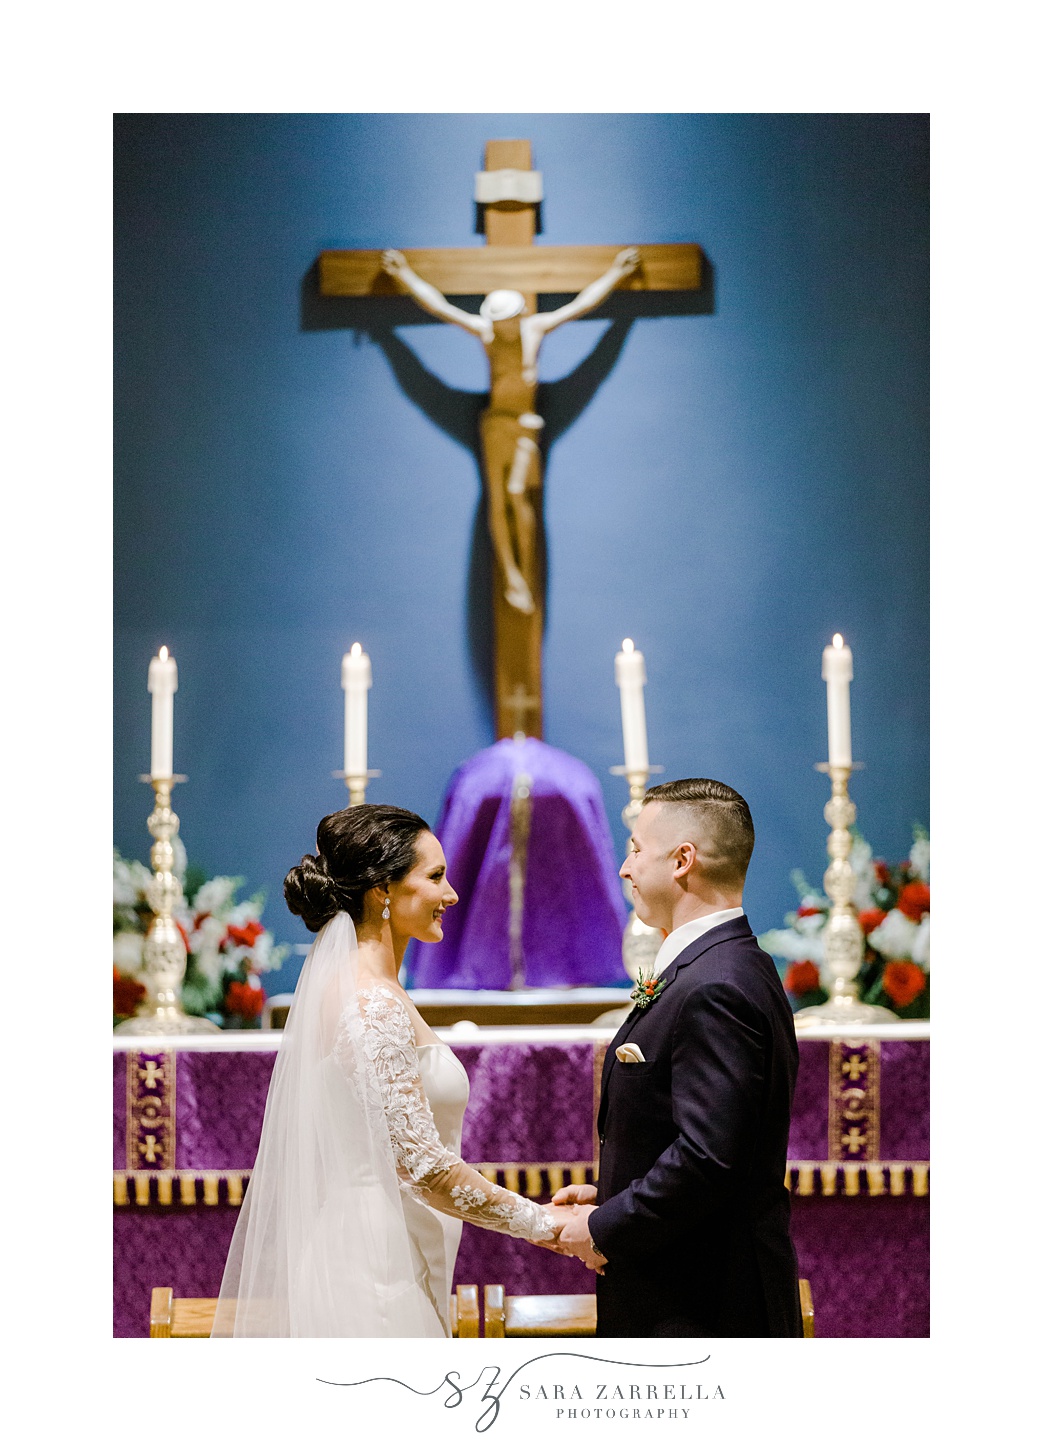 newlyweds smile at each other after traditional Catholic ceremony in Rhode Island